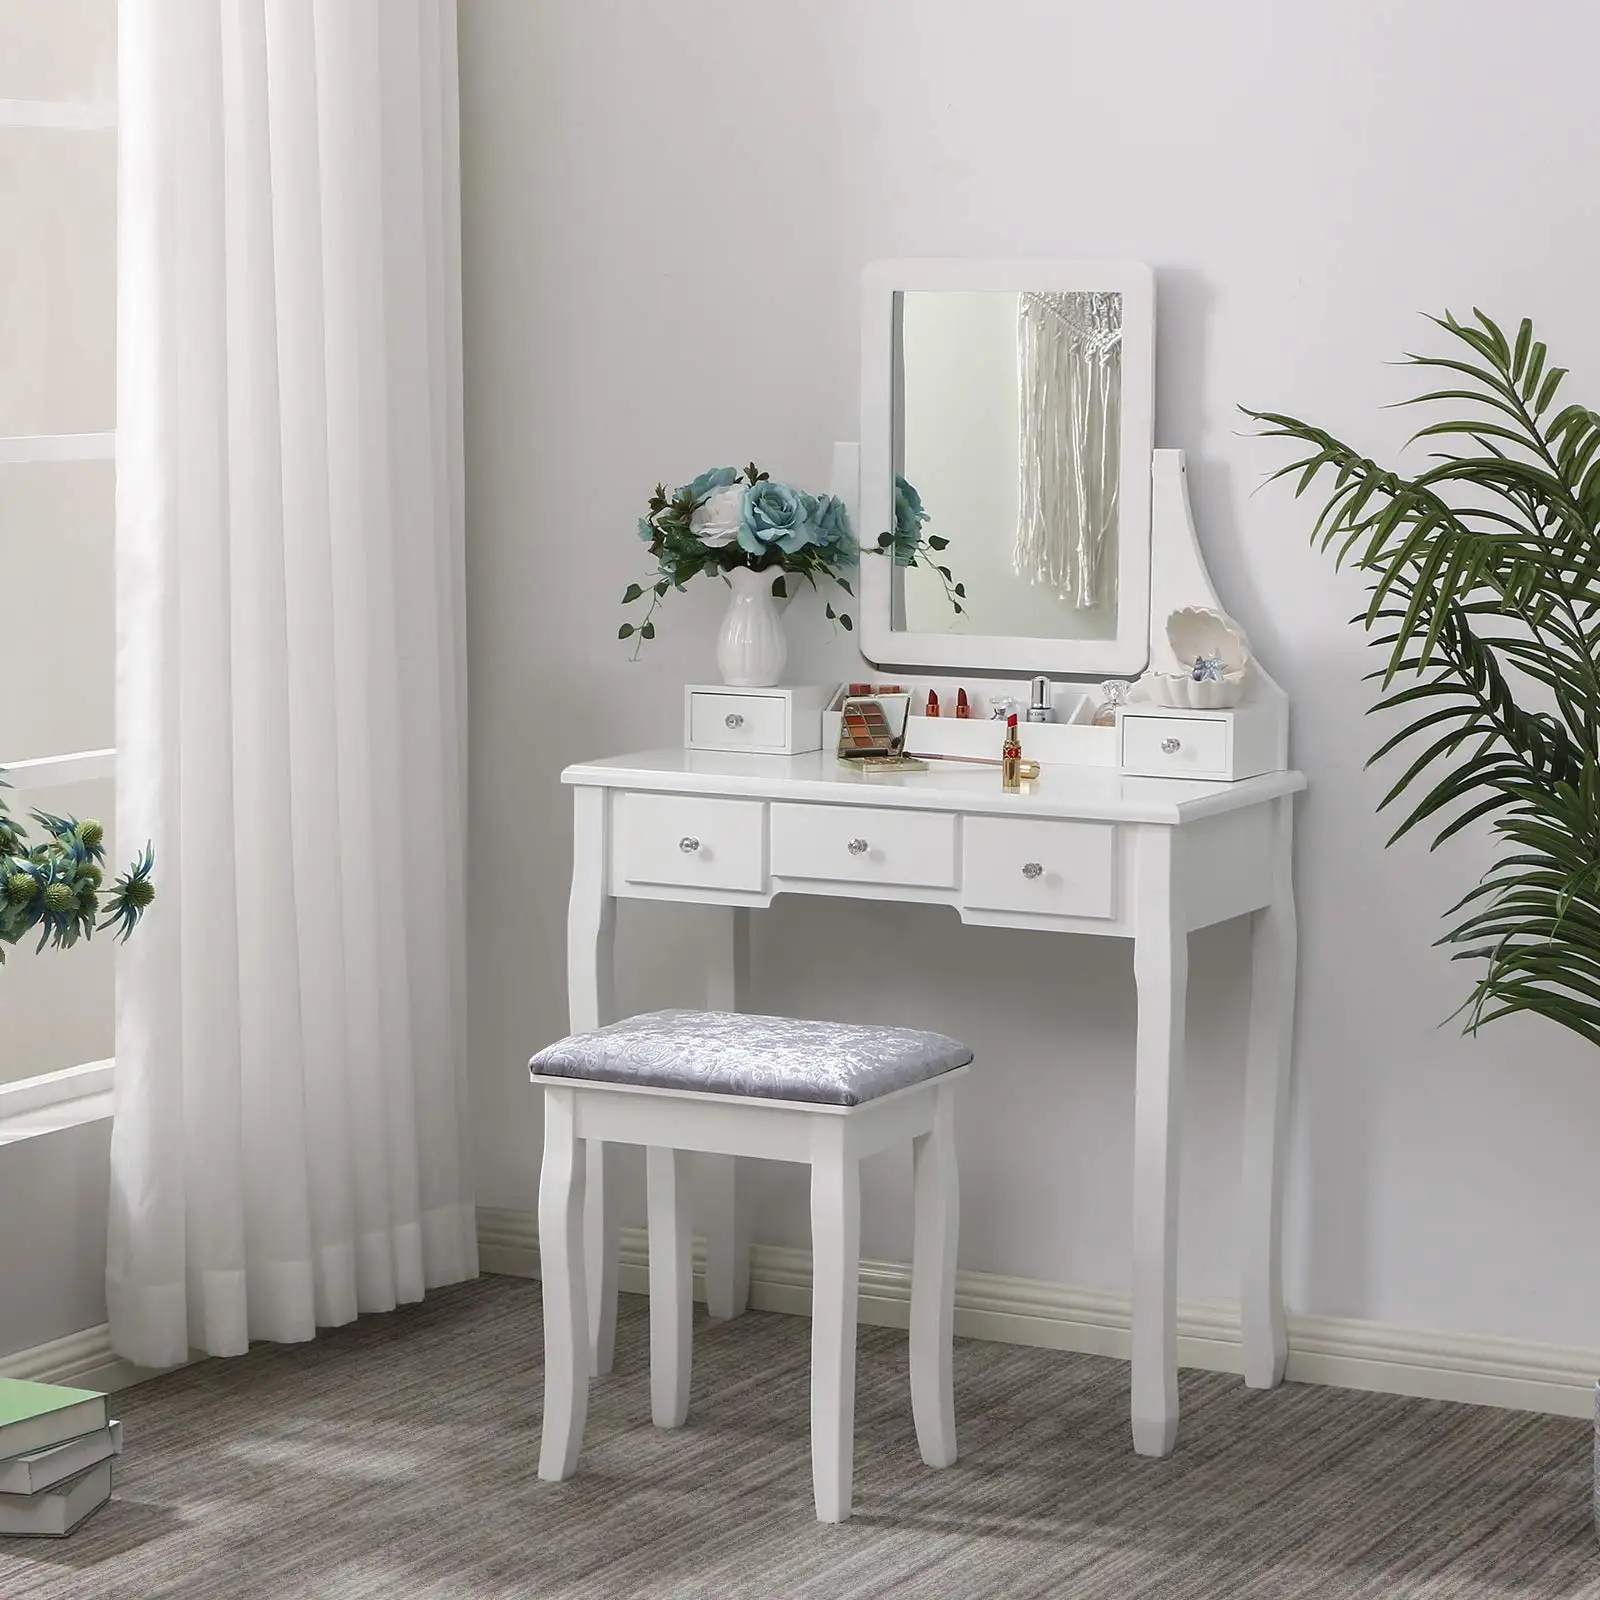 Cushioned Stool Dressing Table Vanity Makeup Table 5 Drawers 2 Dividers Movable Organizers White Vanity Set with Mirror